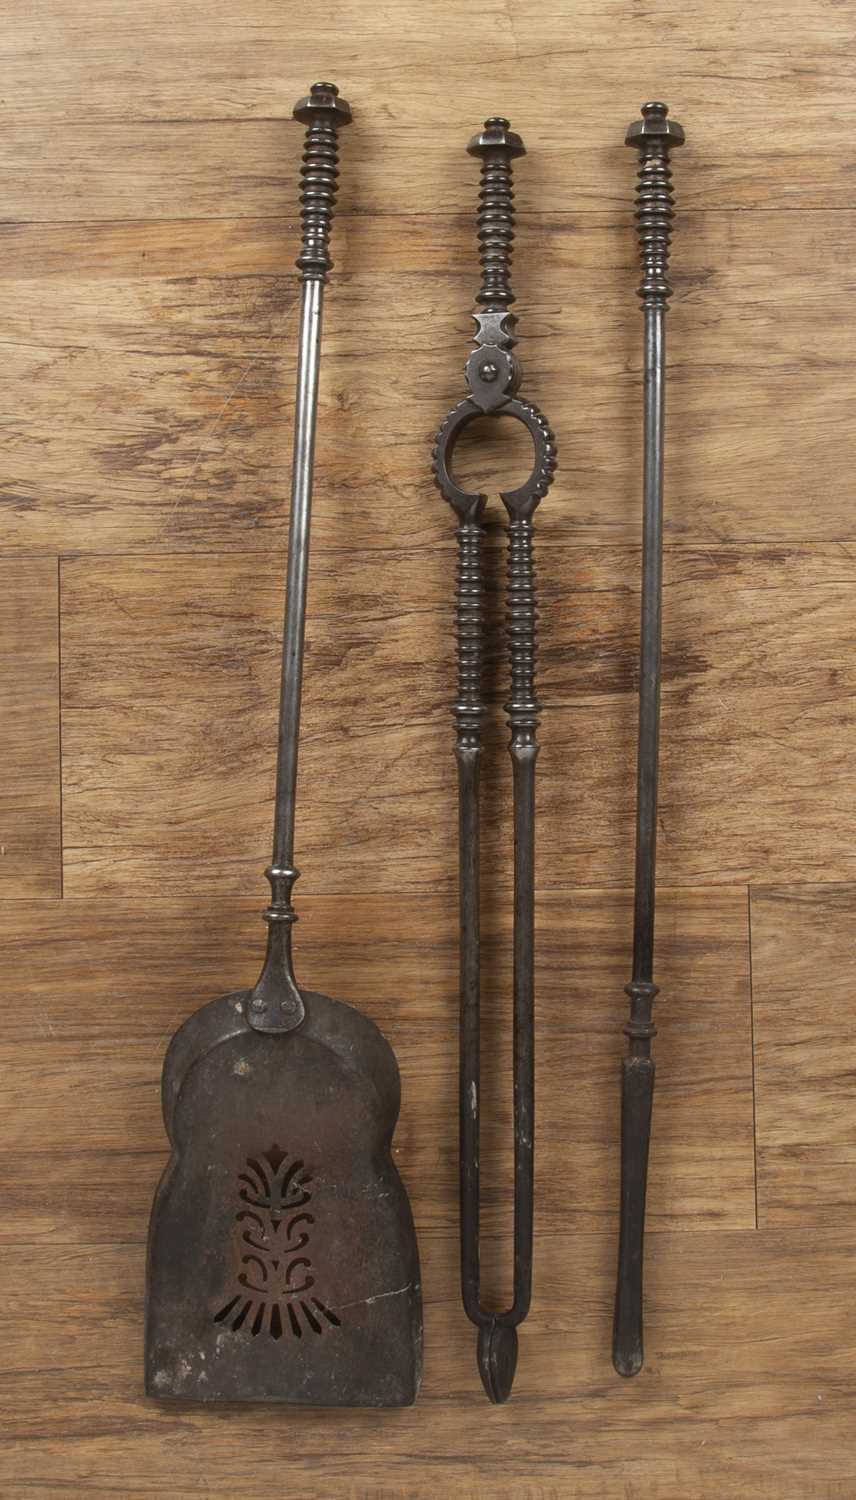 Cotswold School set of steel fire irons, comprising of a shovel, poker and tongs, longest is 78cm - Image 2 of 2